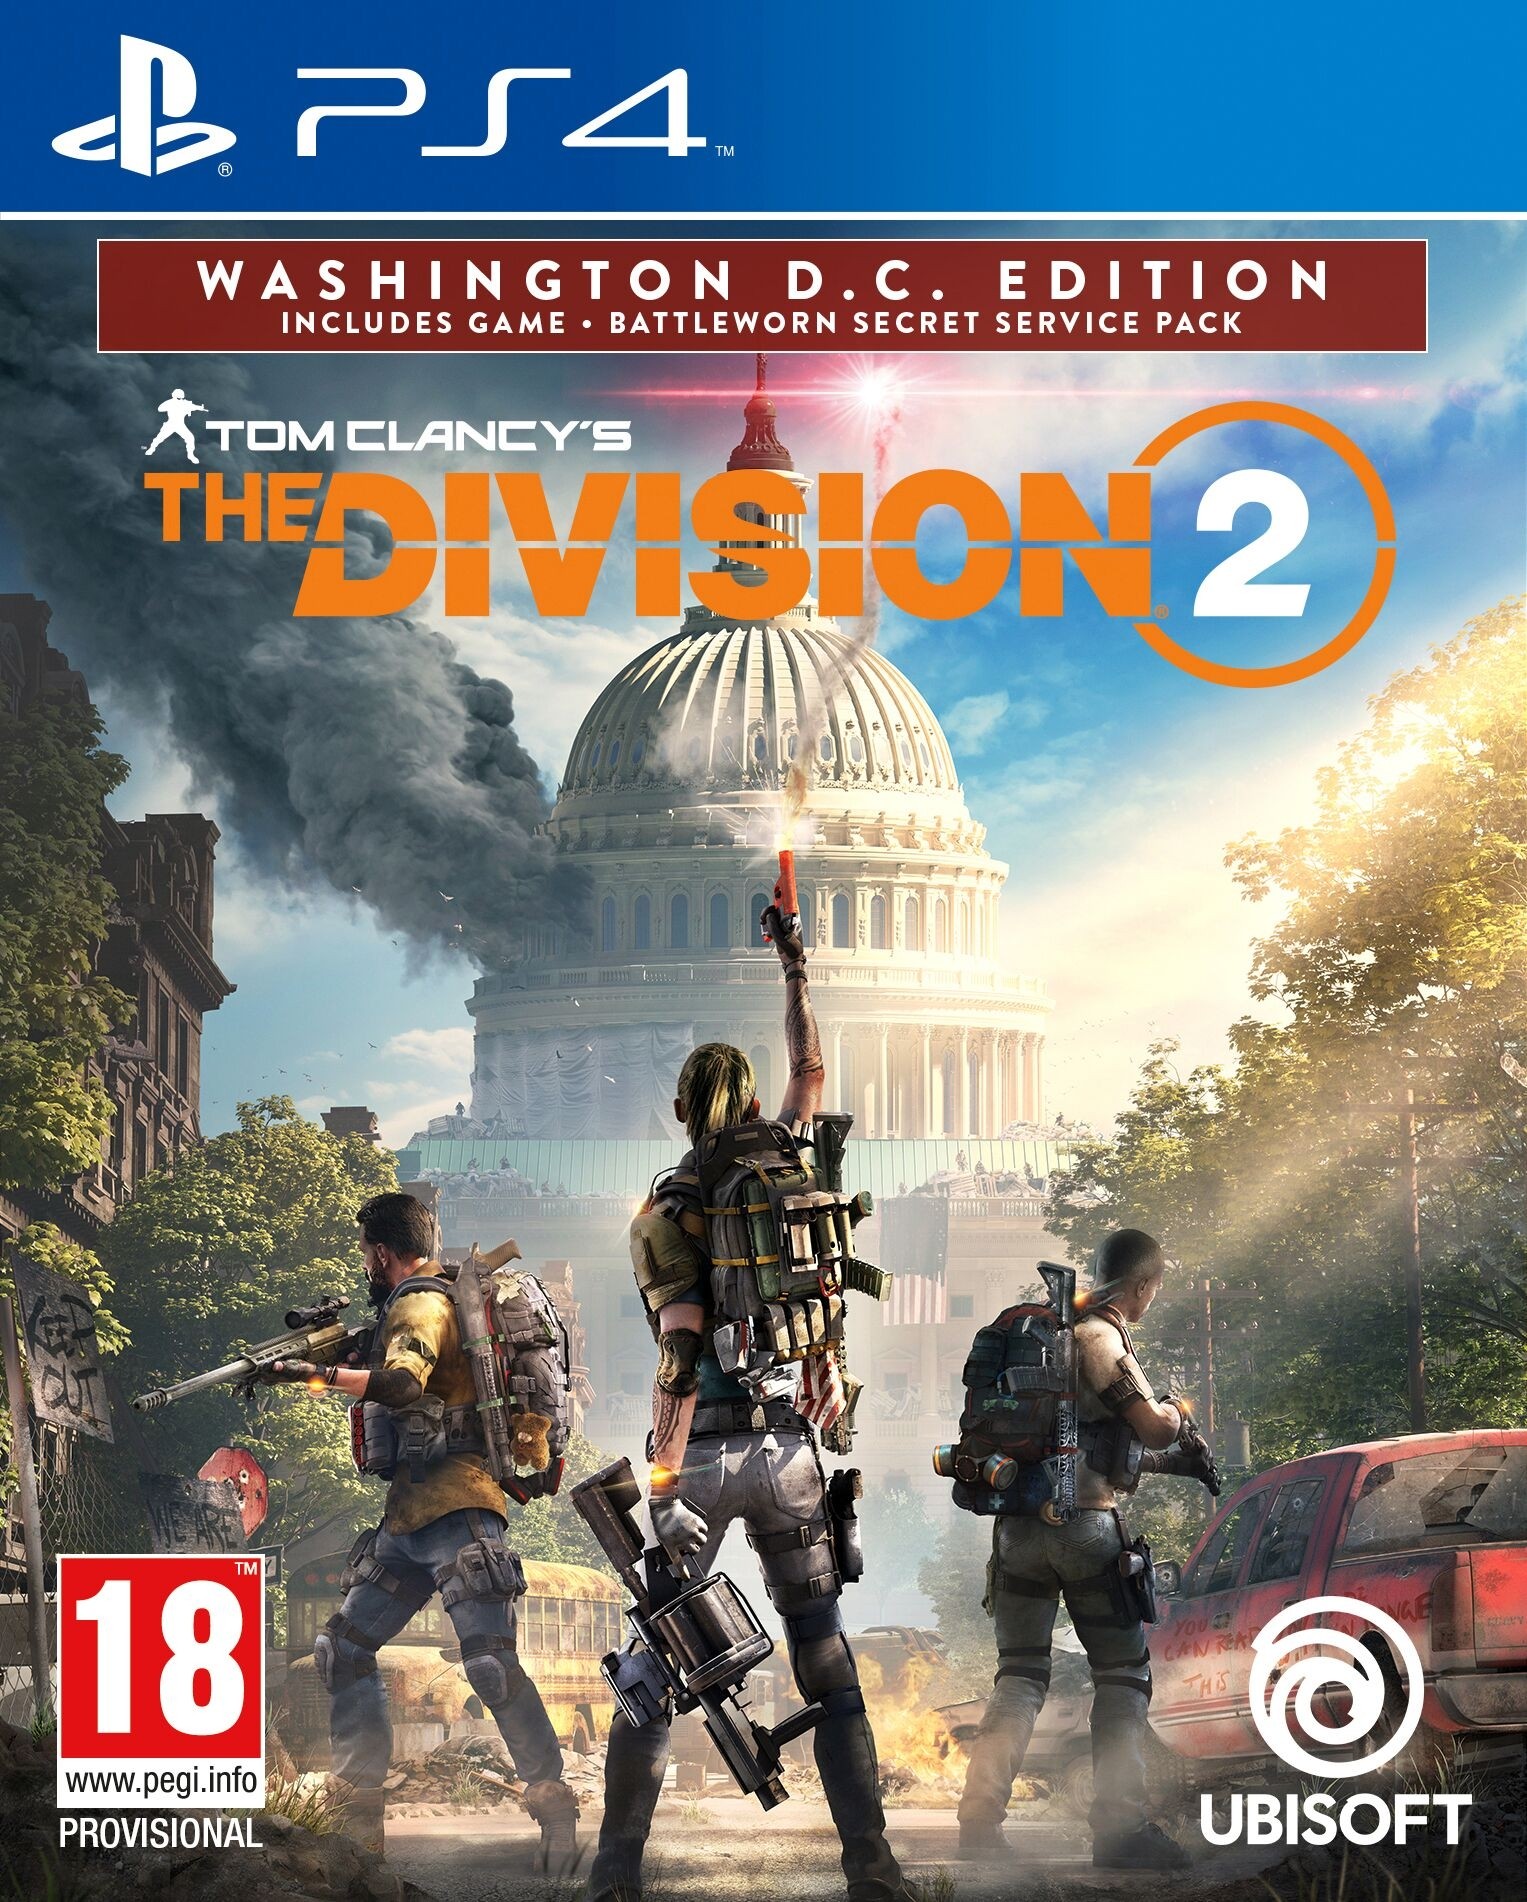 The division ps4. Tom Clancy's the Division 2 ps4. Division 2 ps4. Tom Clancy's the Division 2 ps4 обложка. Tom Clancy s the Division 2 ps4.